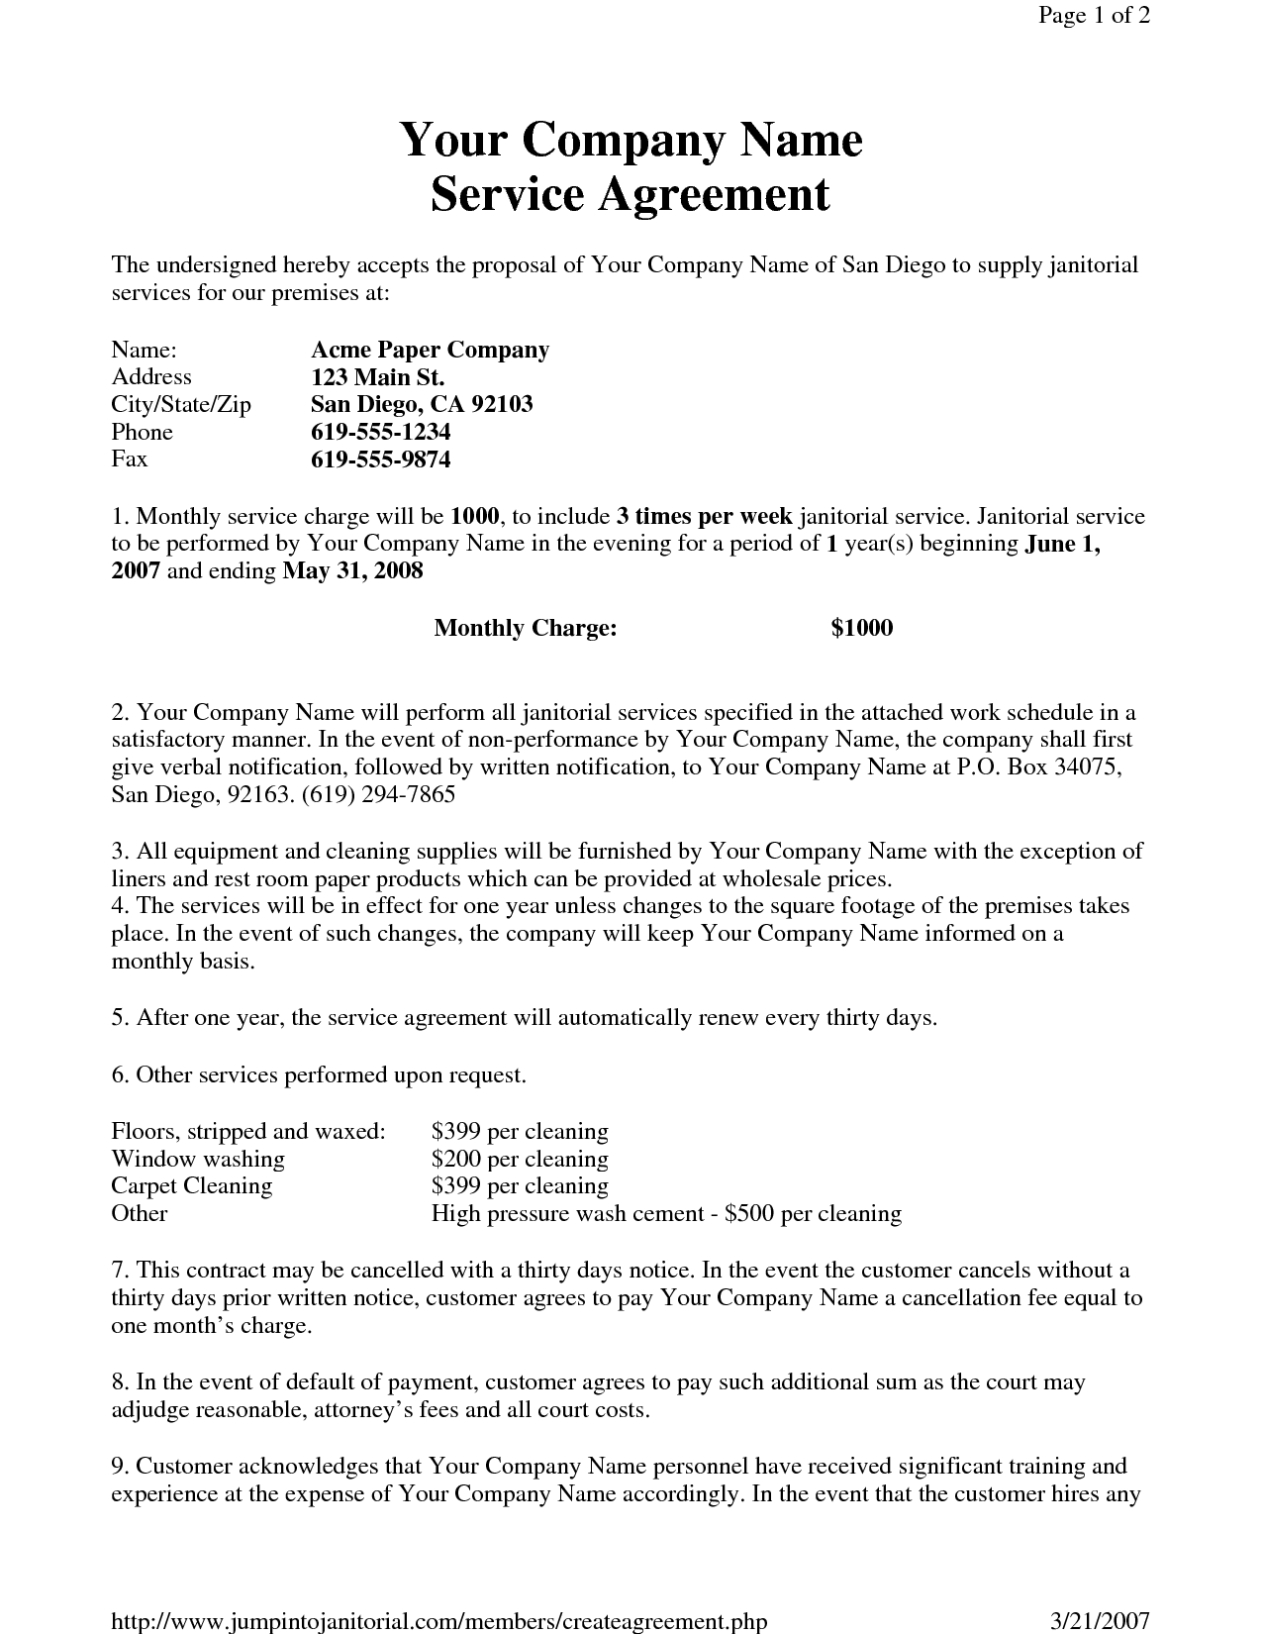 Sample Janitorial Contract - Free Printable Documents Within Cleaning Business Contract Template